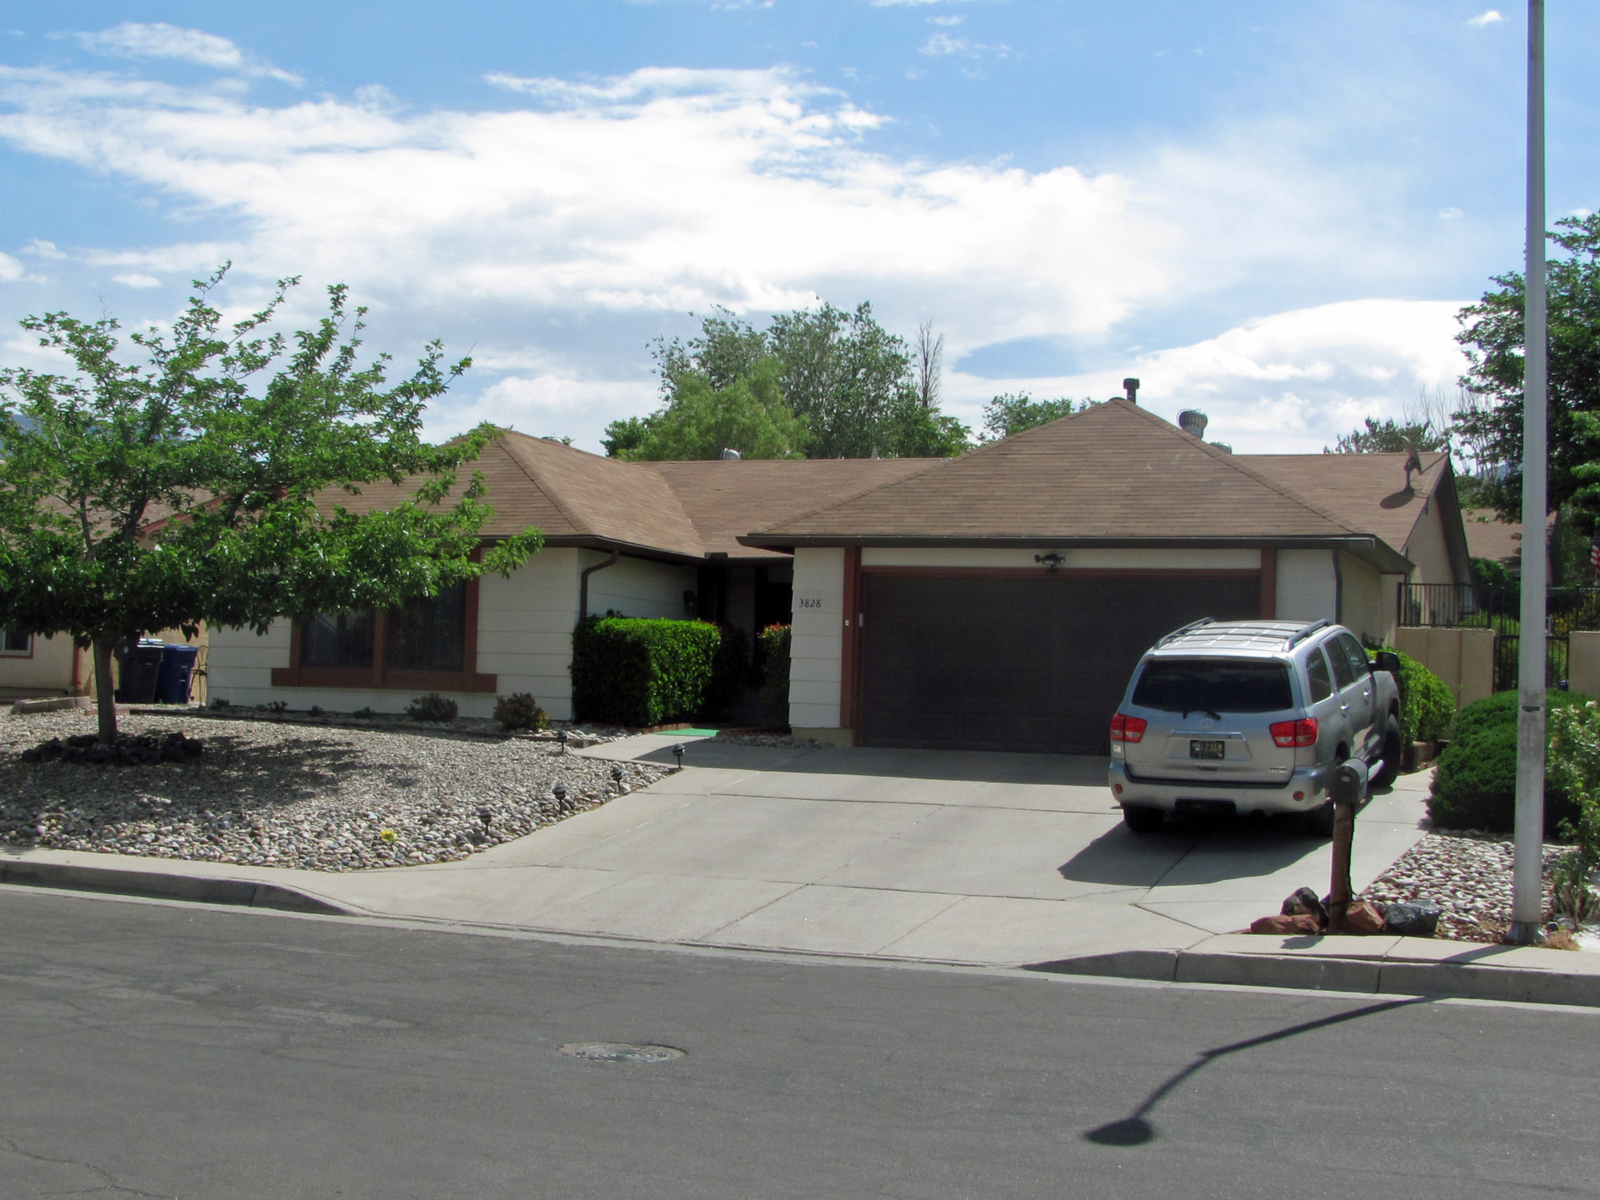 ALBUQUERQUE, NEW MEXICO, USA - May 22, 2014: Filming location of Breaking Bad television series: Walter White home house for a post on whether or not Albuquerque NM is safe to visit